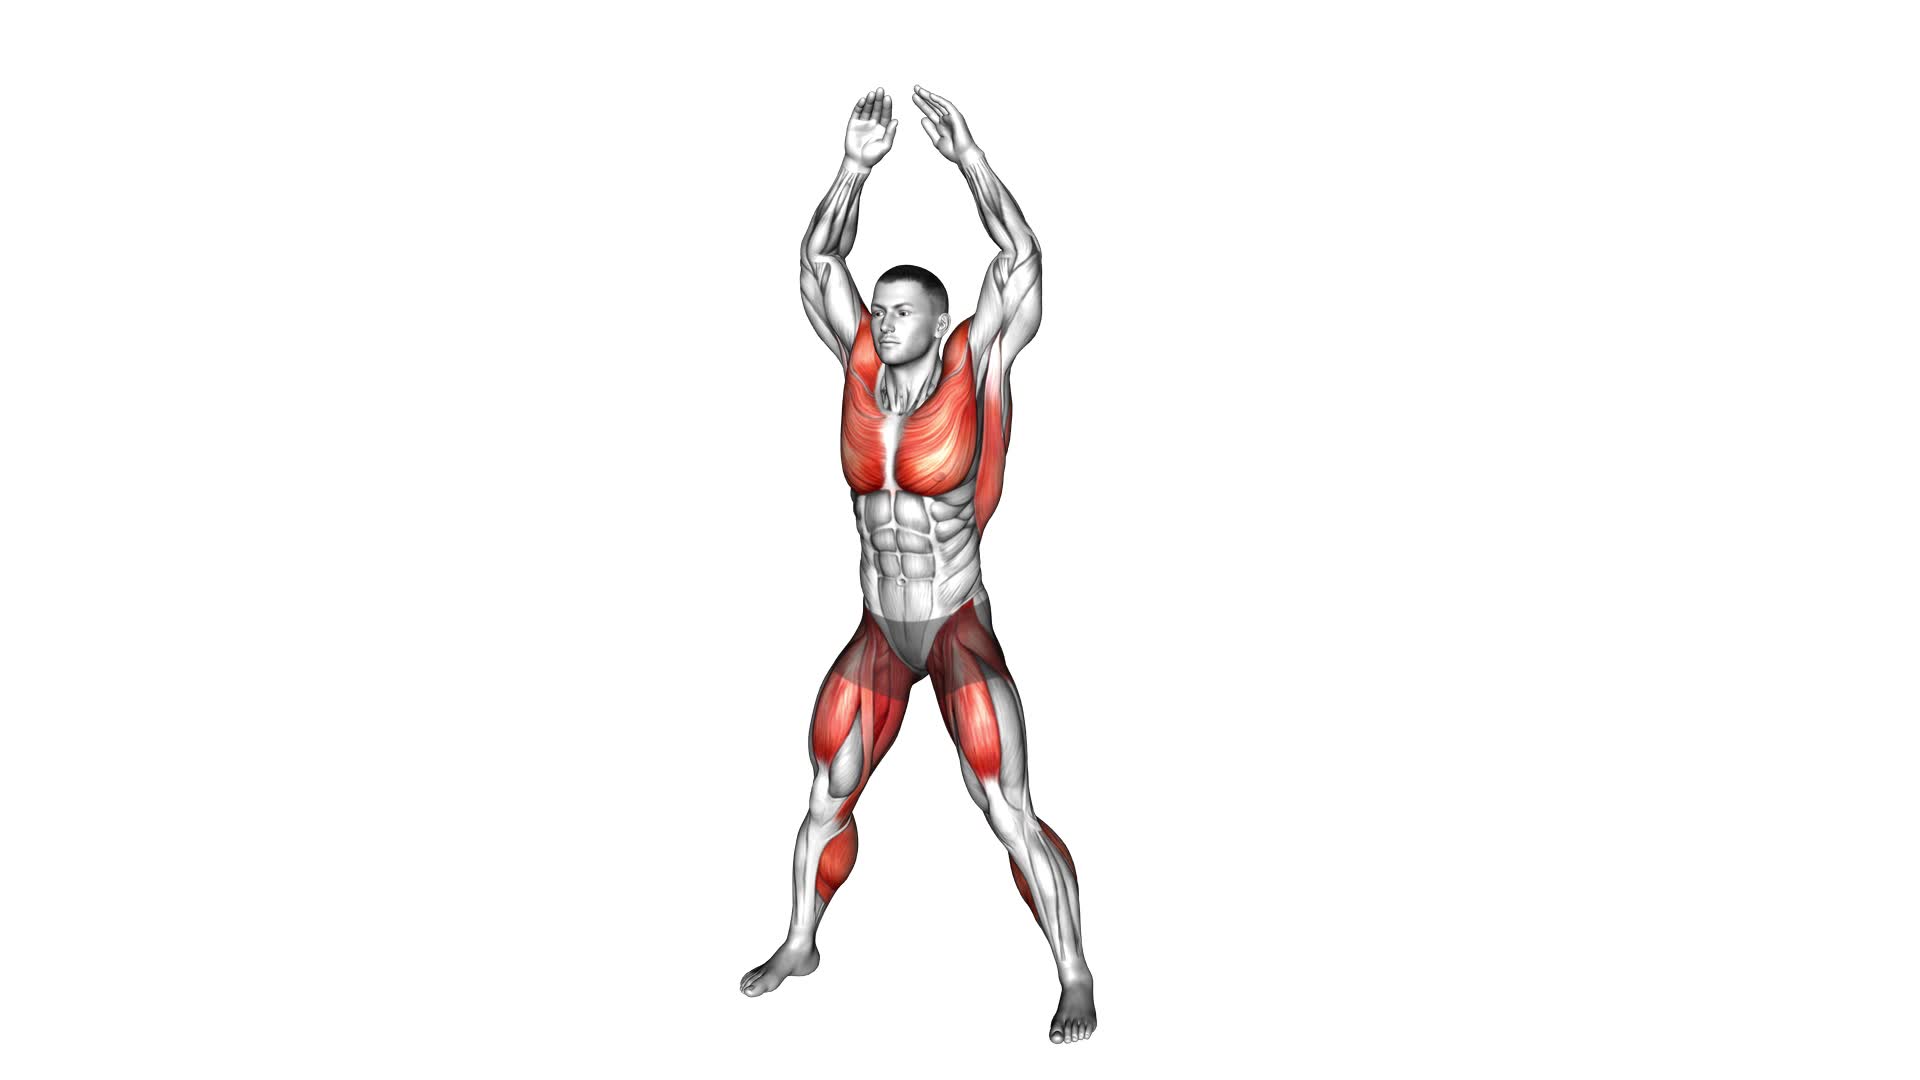 Jumping Jack (male) - Video Exercise Guide & Tips